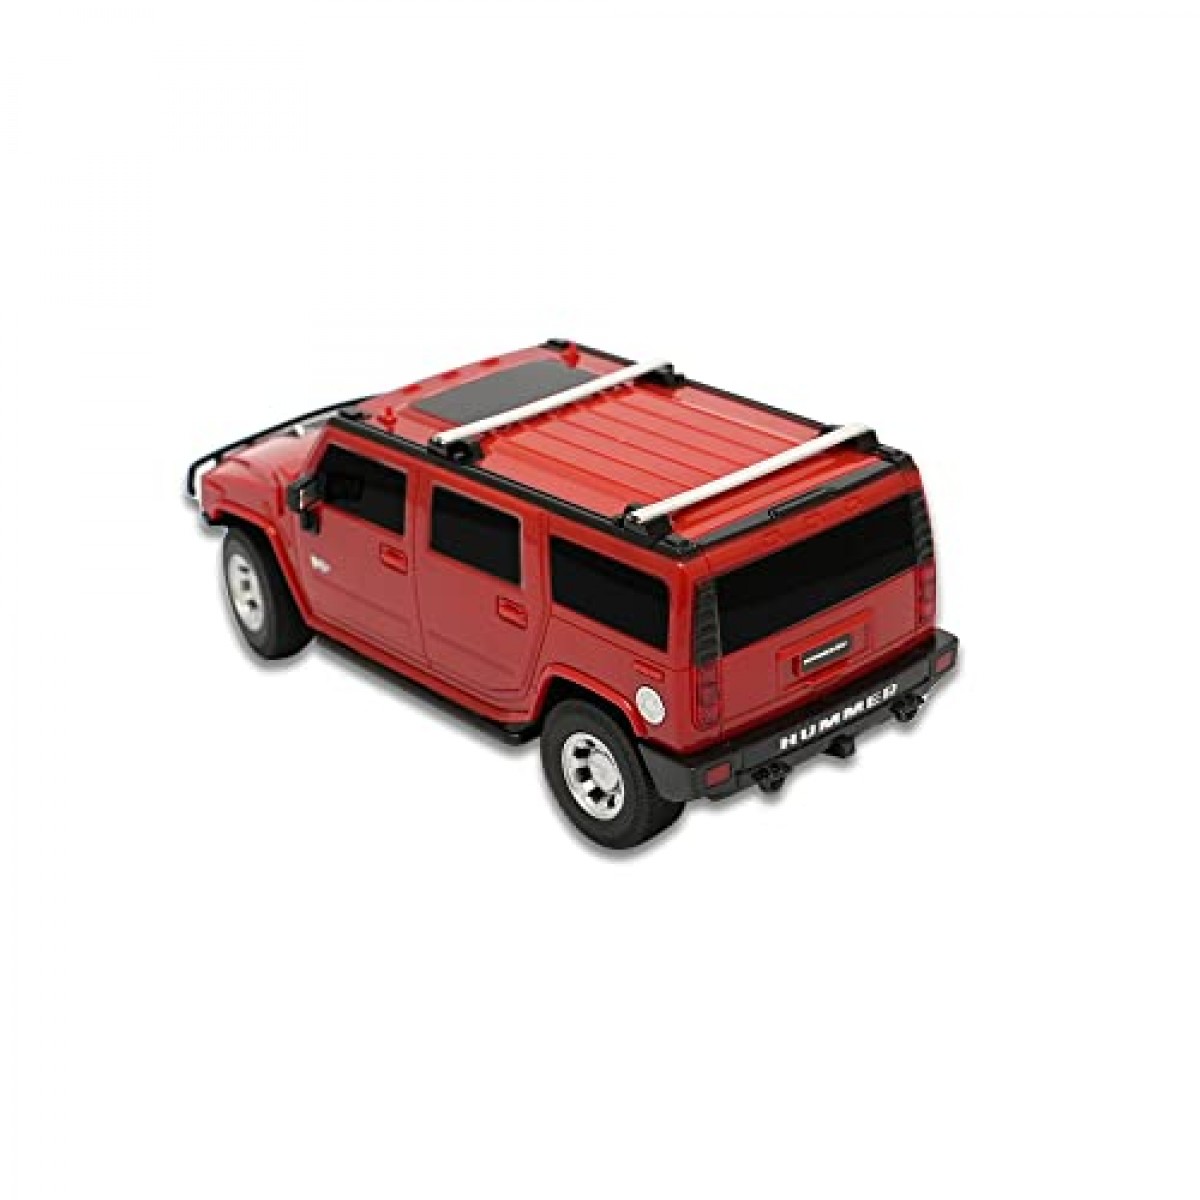 Road Burner Rechargable Remote Control Car for Kids Hummer H2 Full Function, 1:24 Scale Pack of 1, Red, Age 6Y+